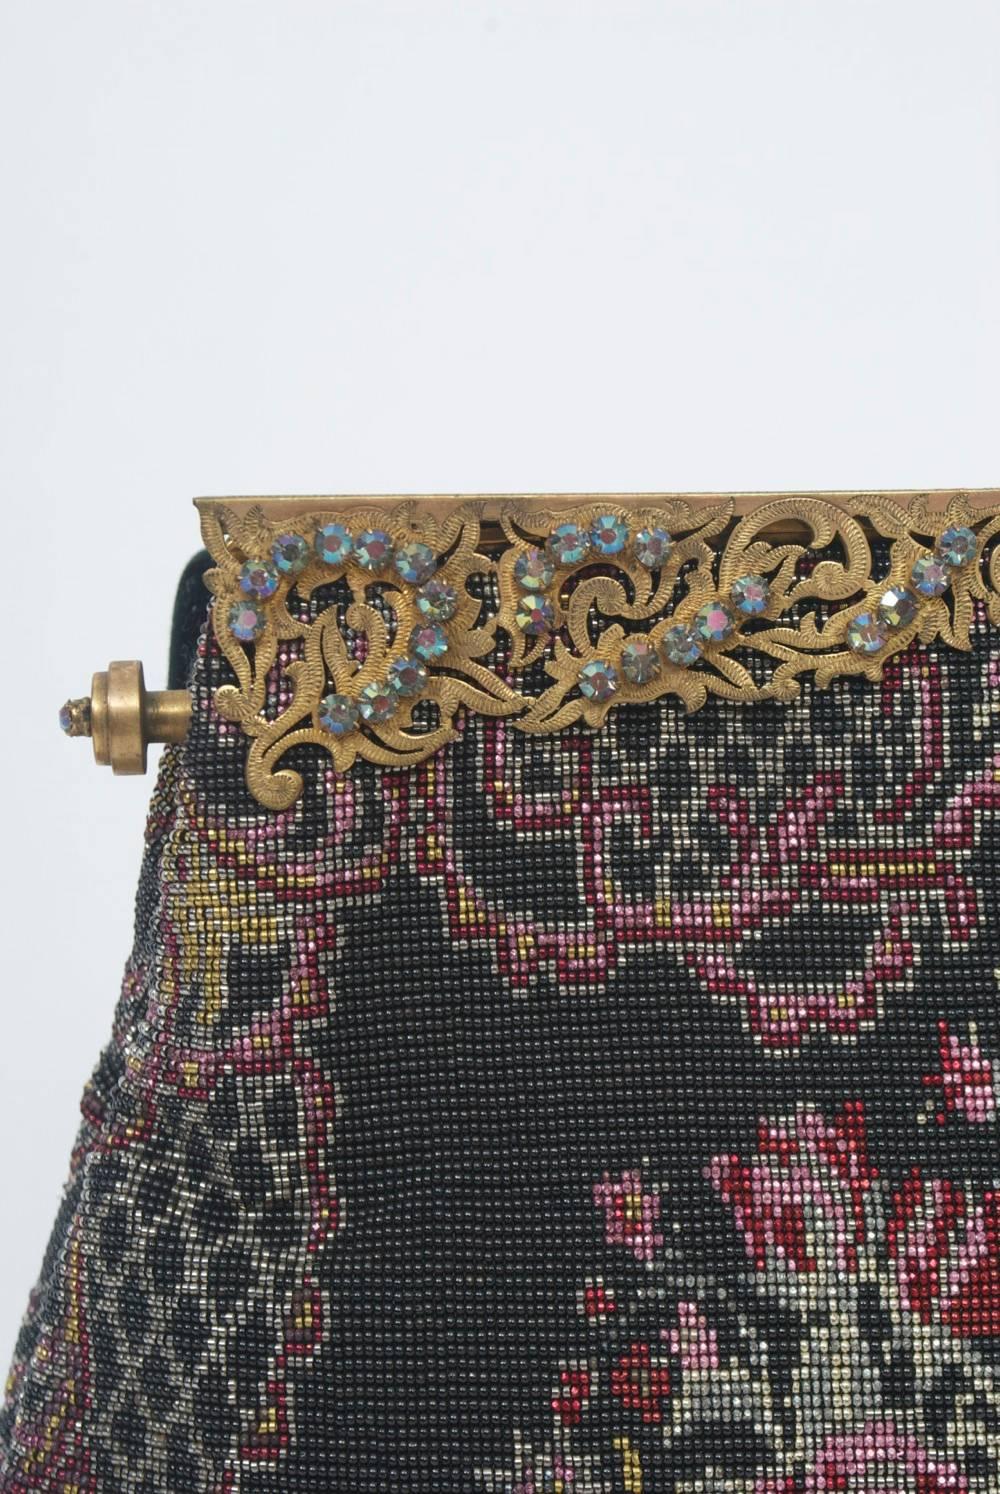 Women's Floral Microbeaded Evening Bag For Sale